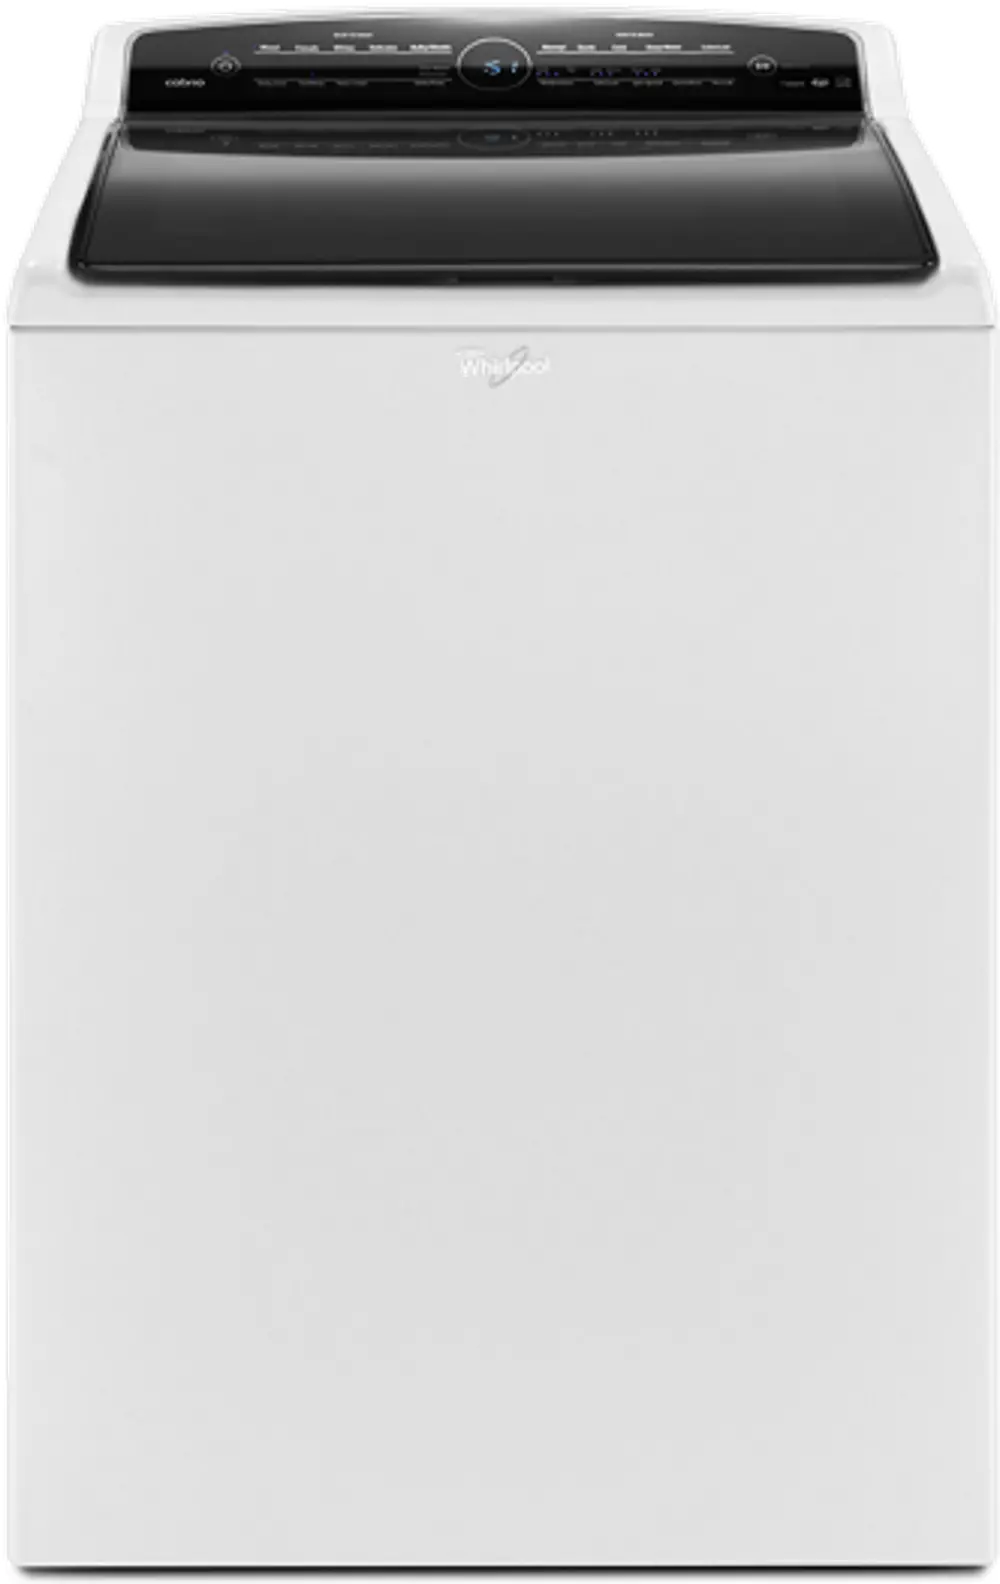 WTW7300DW Whirlpool 4.8 cu. ft. Top Load Washer - White-1